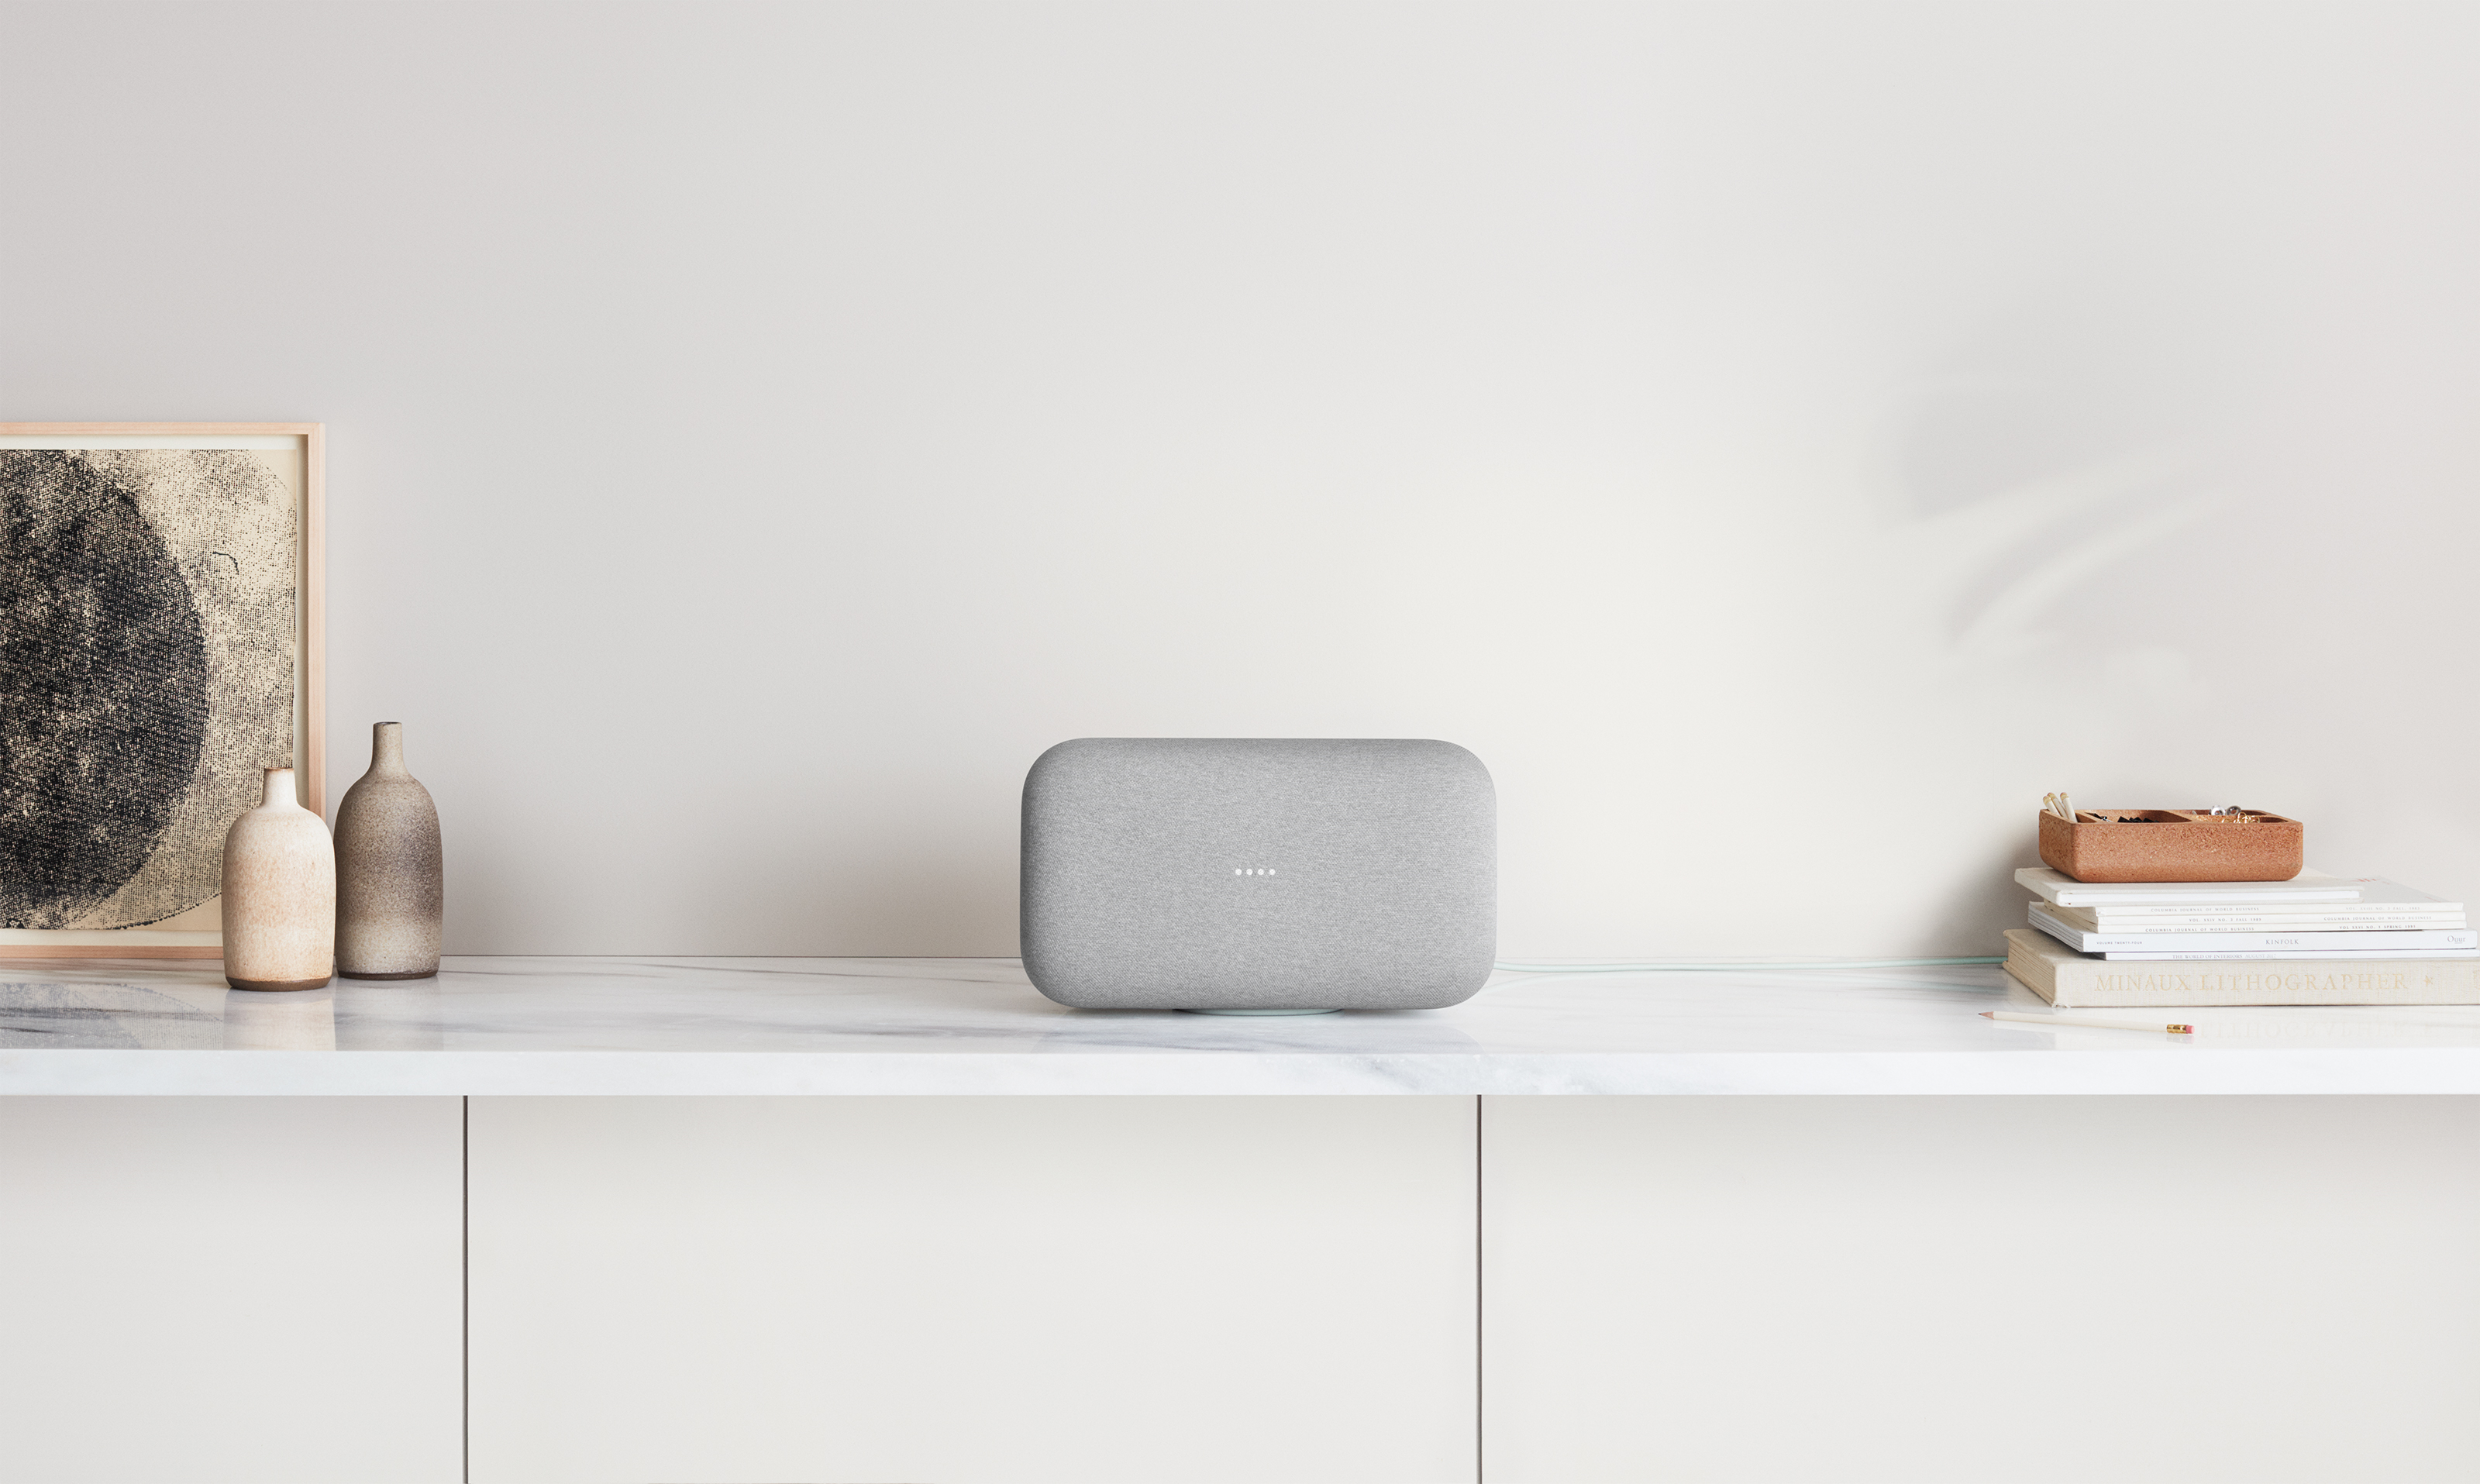 What are the features of the Google Home Max White?